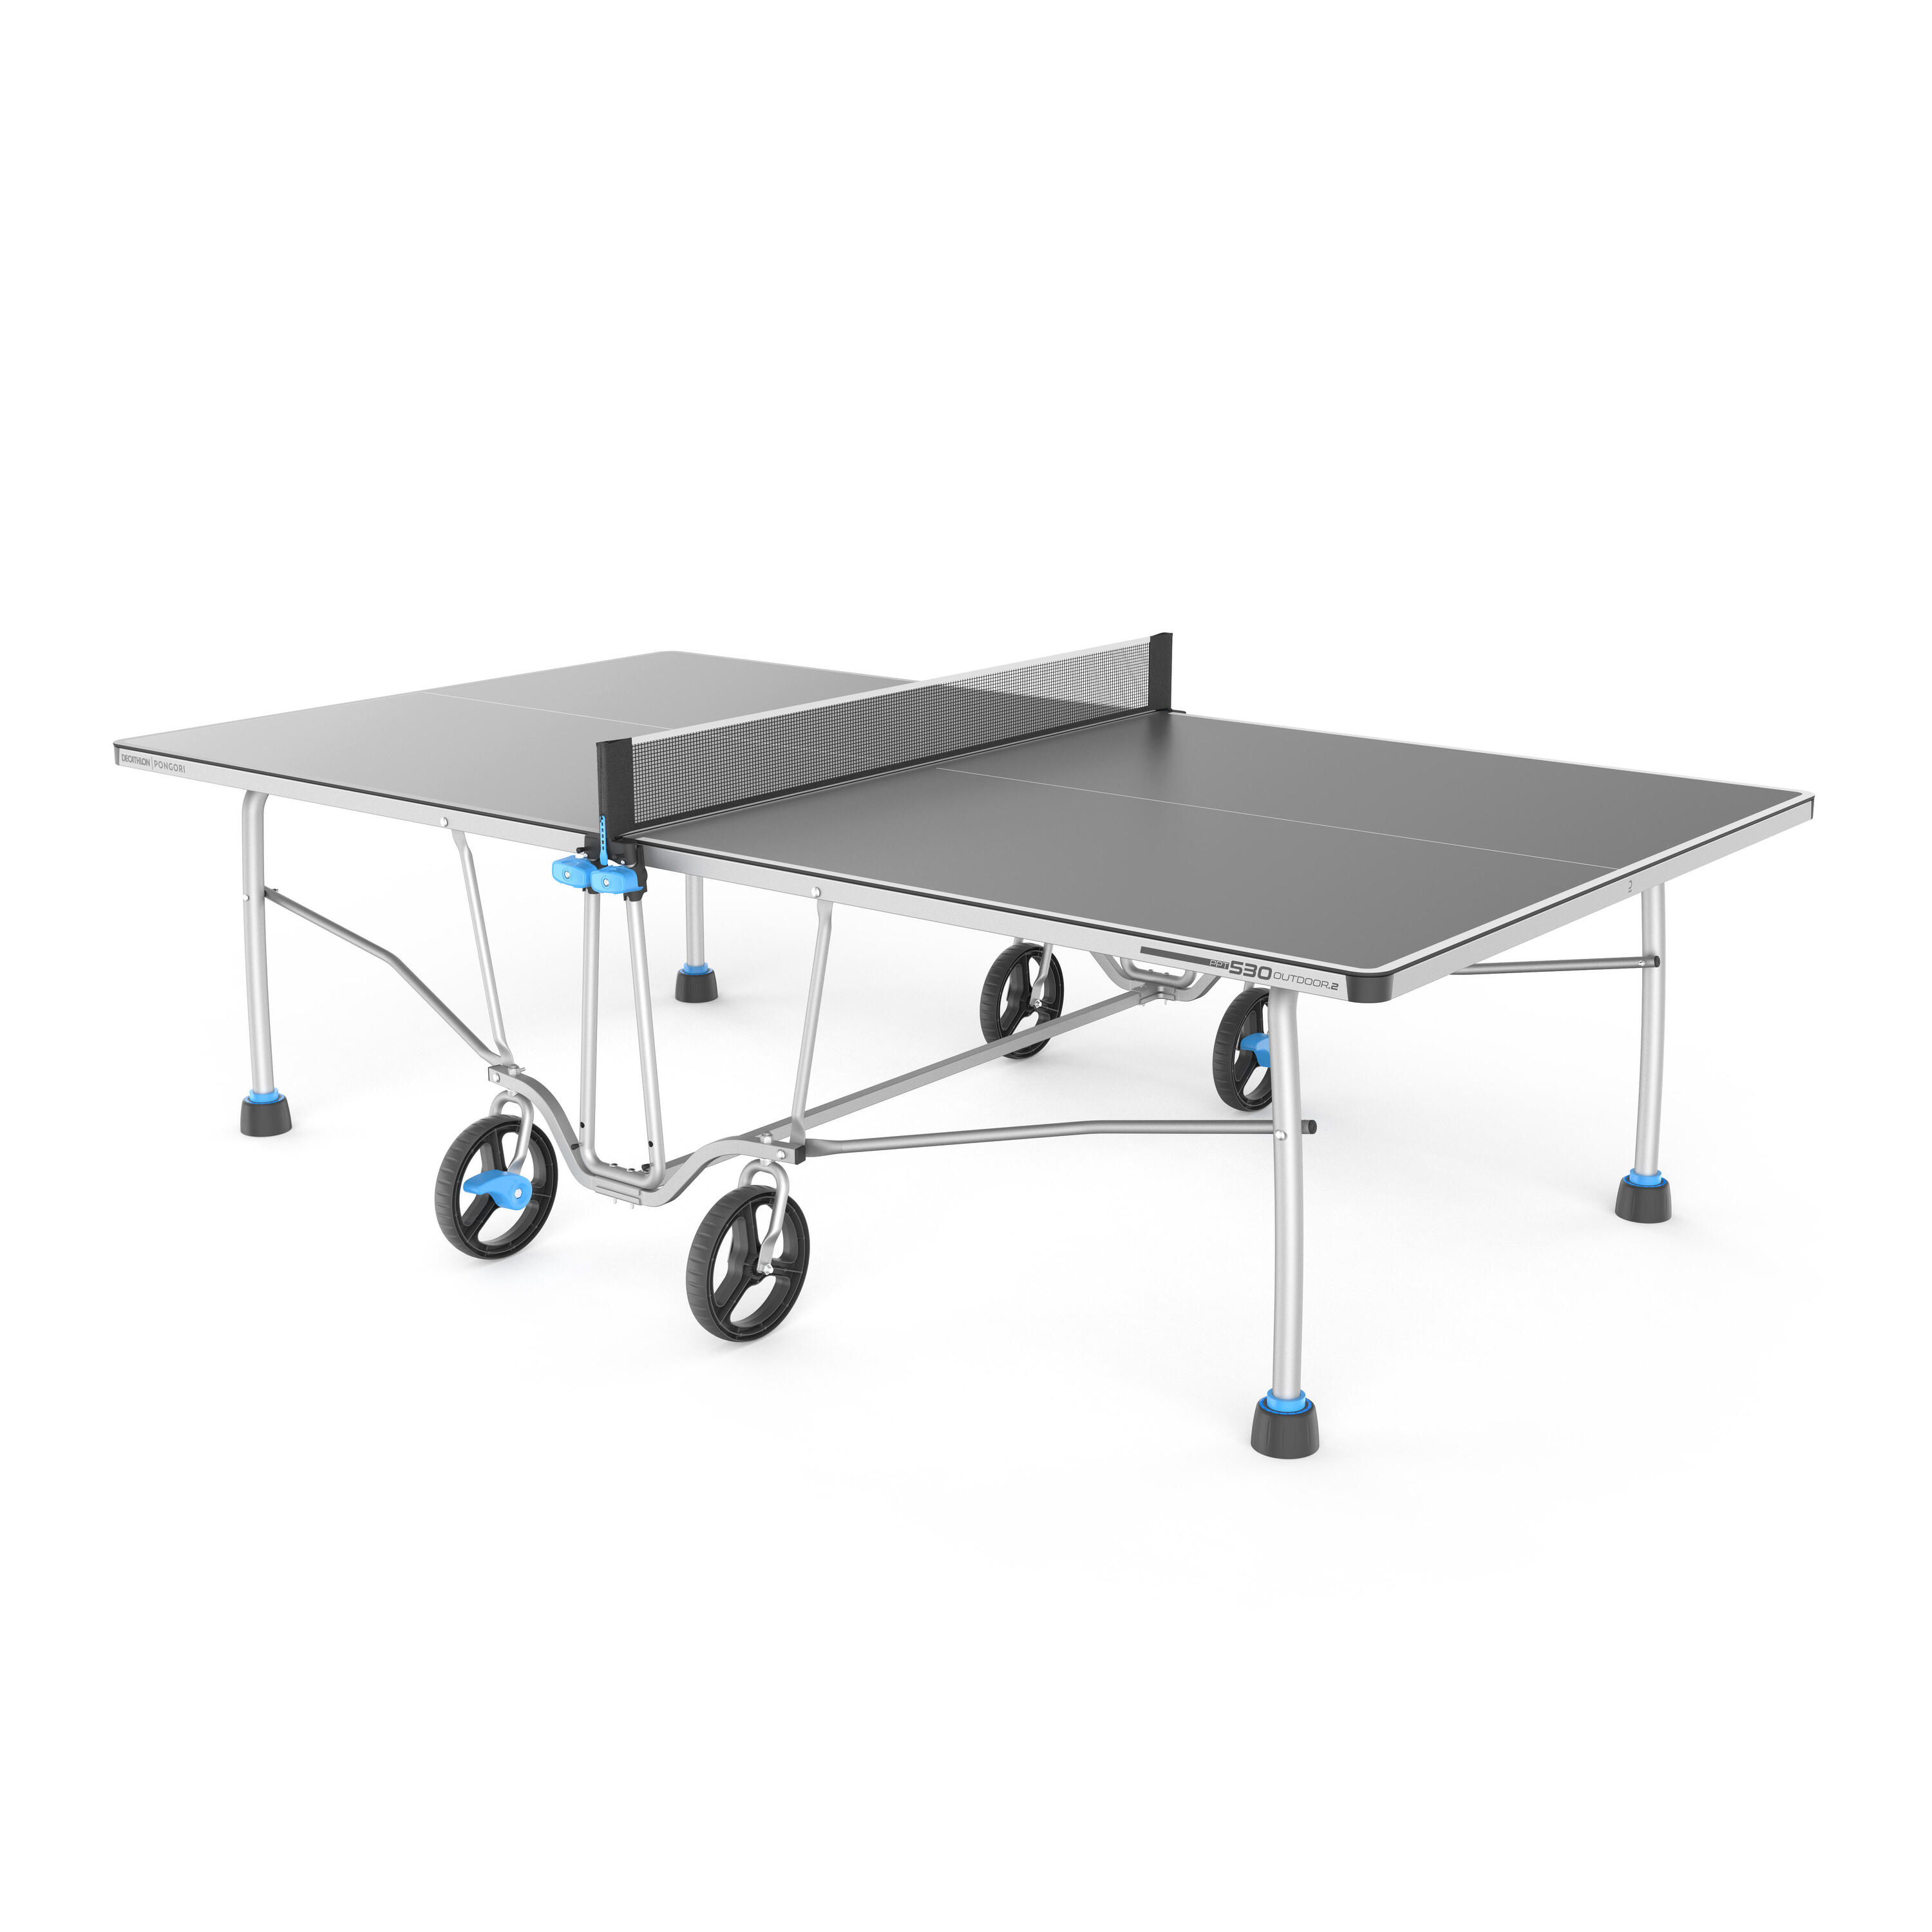 Outdoor Table Tennis Table PPT 530.2 - Grey 13/13